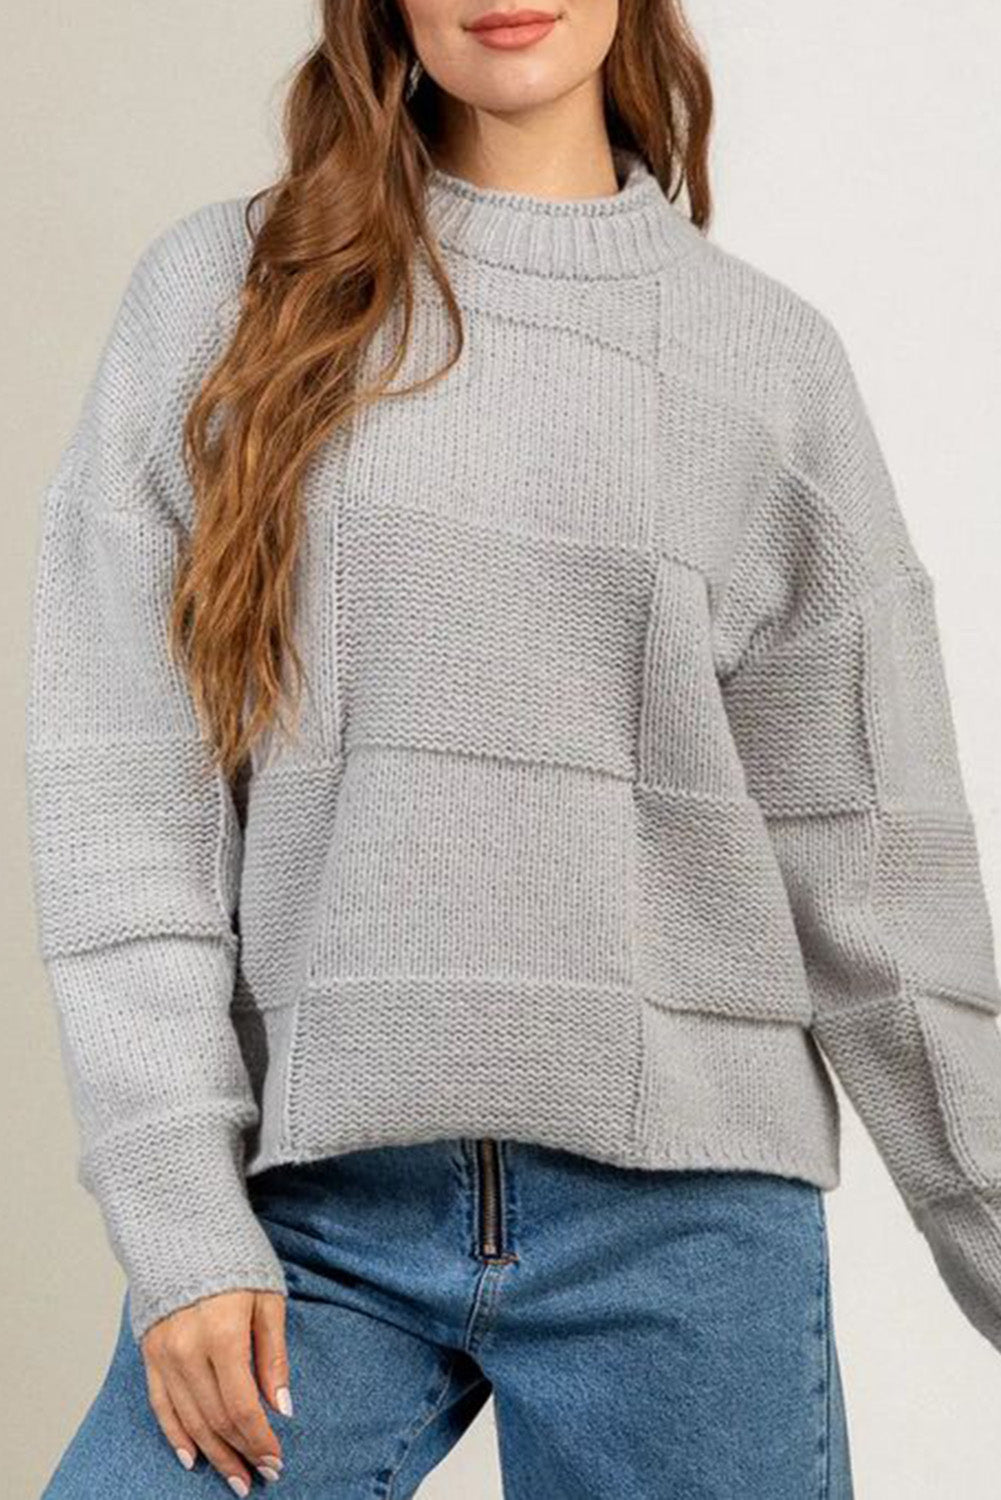 Gray Mock Neck Checkered Textured Sweater Gray 100%Acrylic clothes Sweater sweaters Sweatshirt